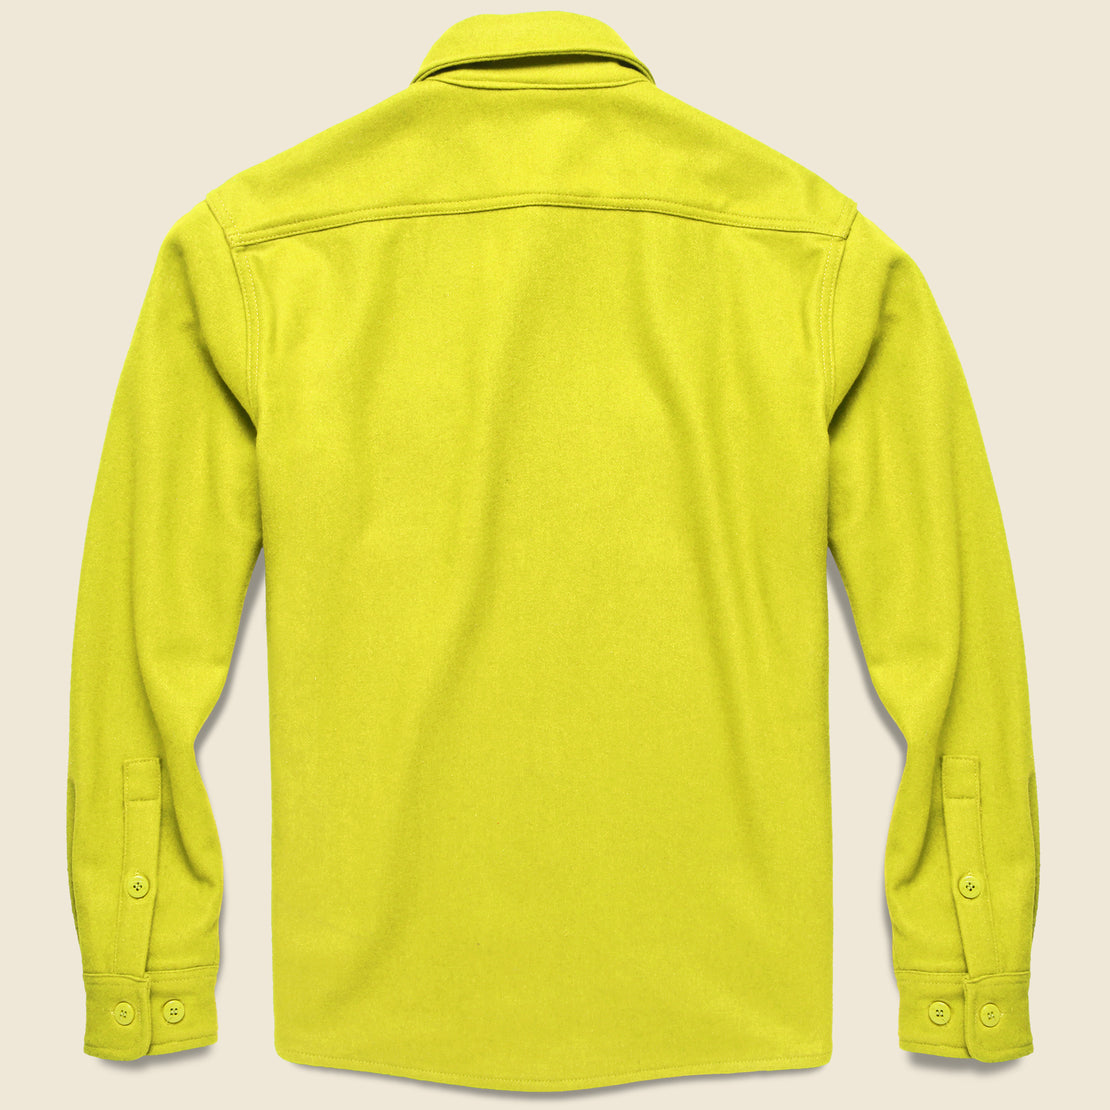 CPO Wool Shirt - Neon Yellow - Schott - STAG Provisions - Tops - L/S Woven - Overshirt